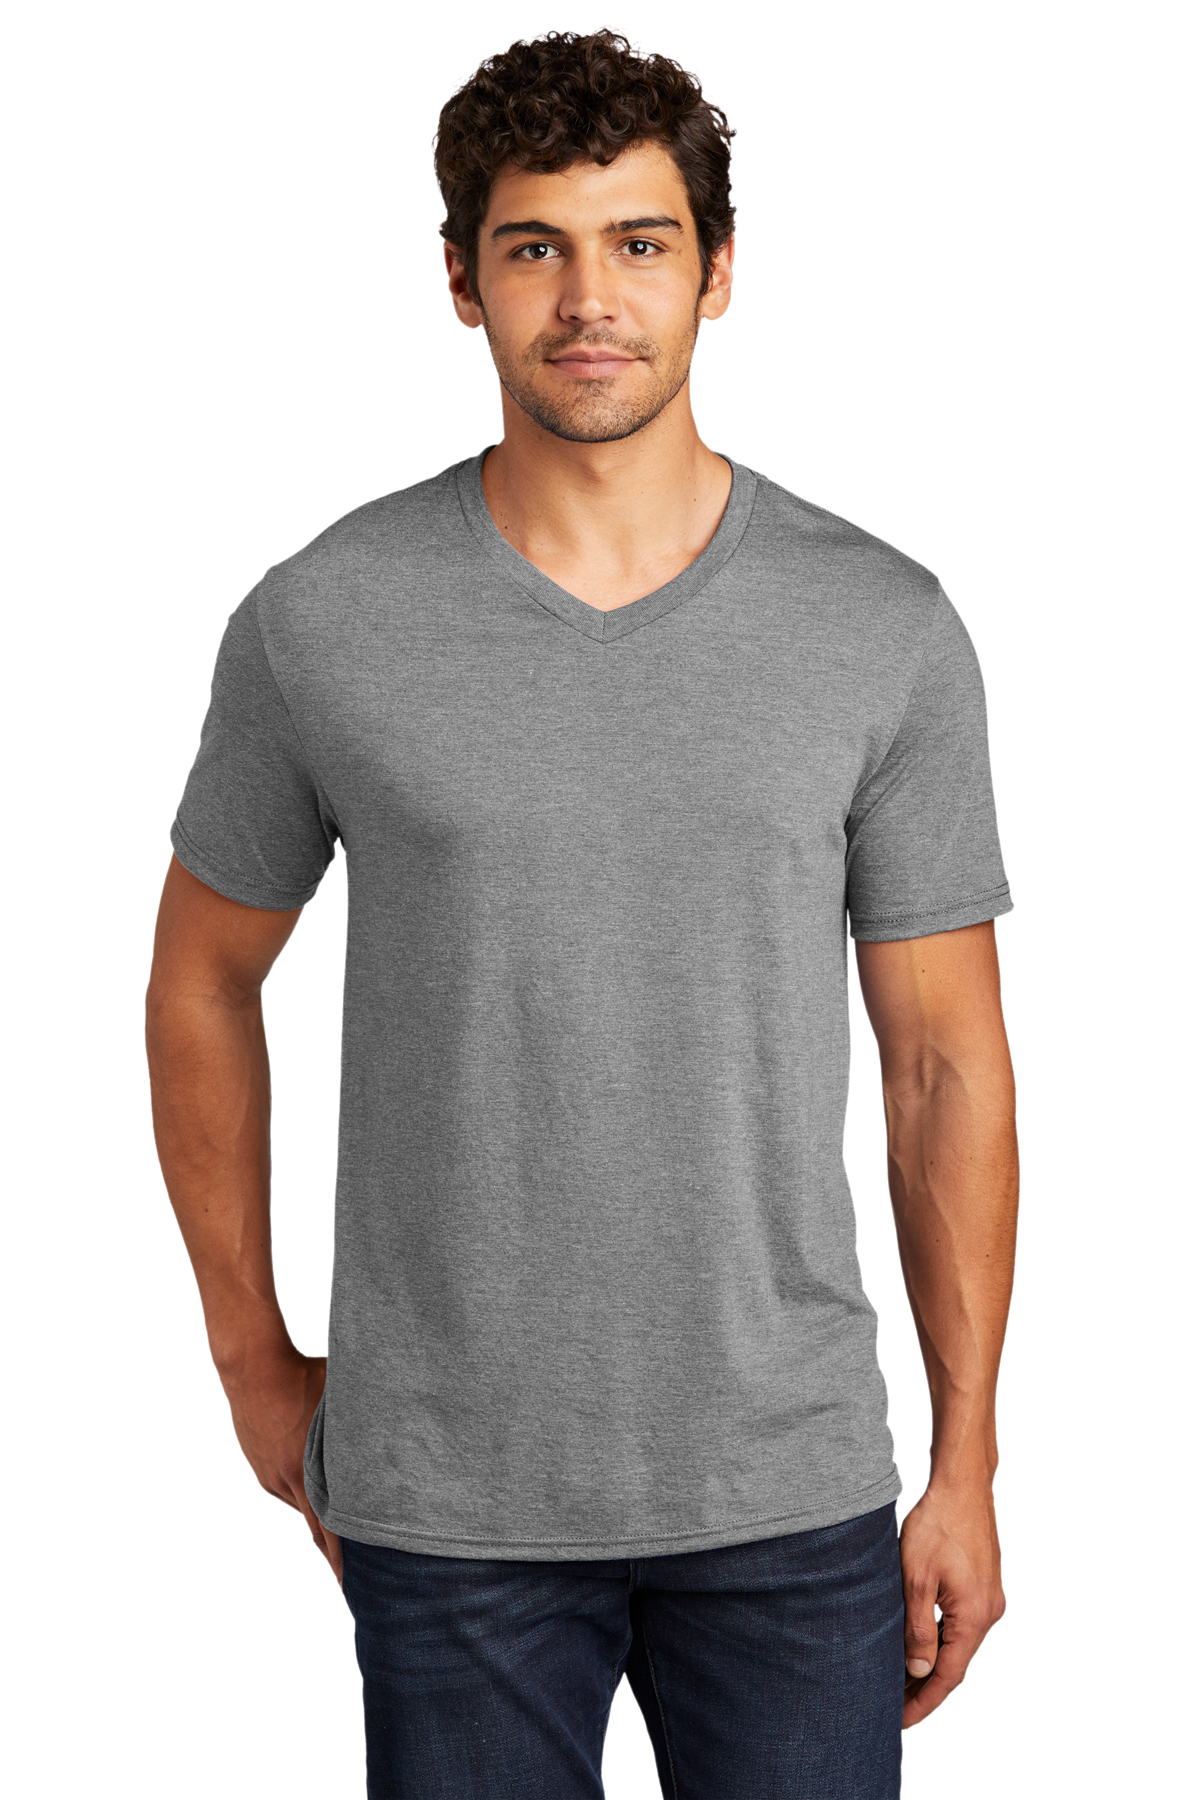 District Perfect Tri V-Neck Tee | Product | District